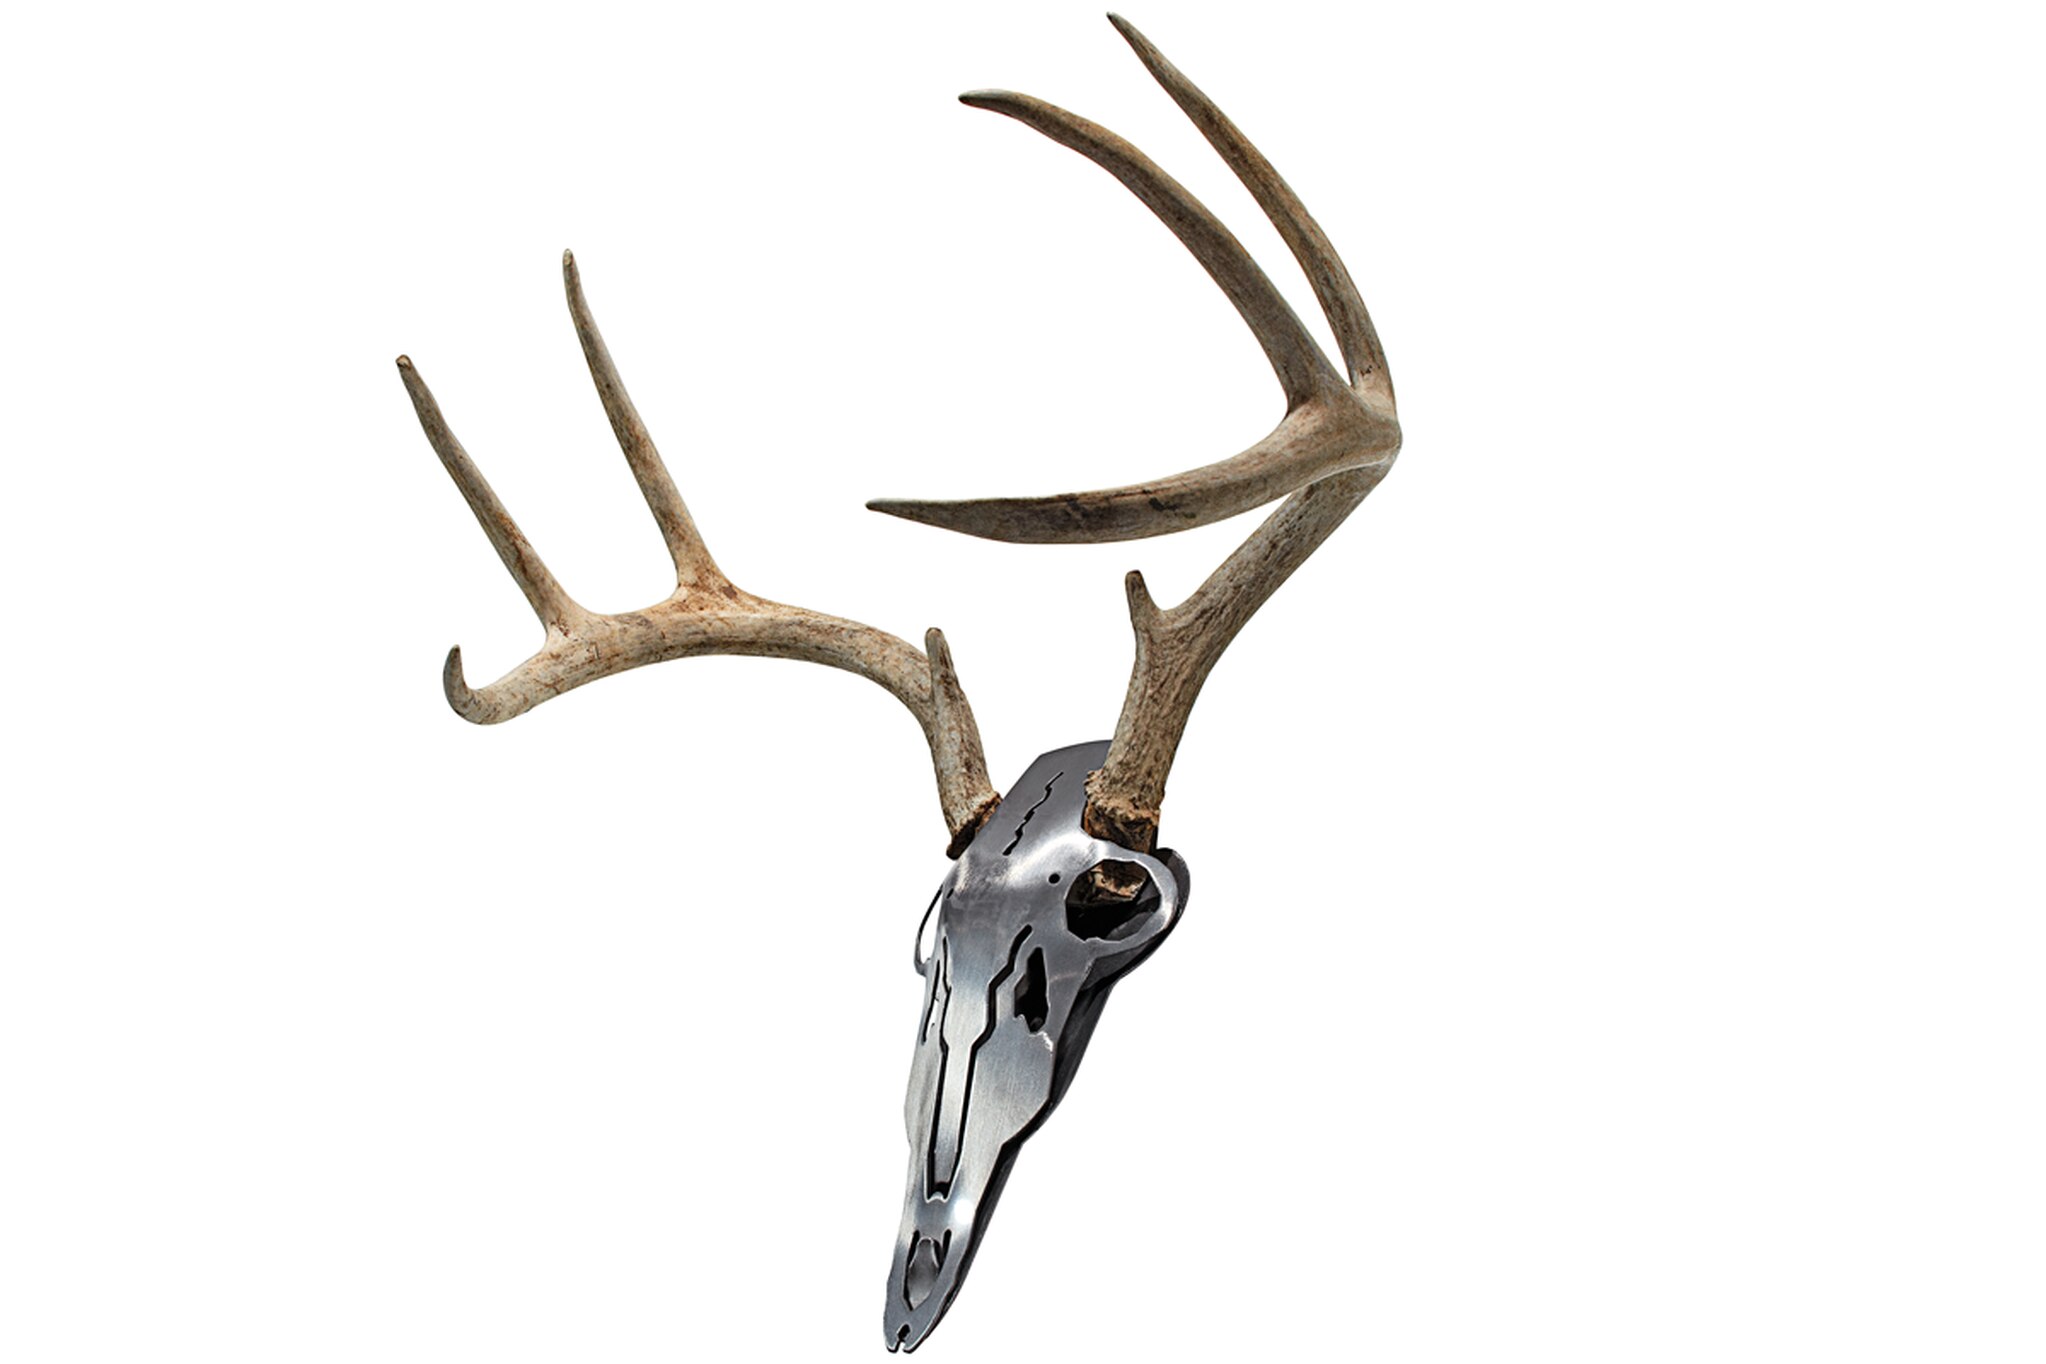 This cool kit allows you to take a set of antlers that have been cut from the skull.